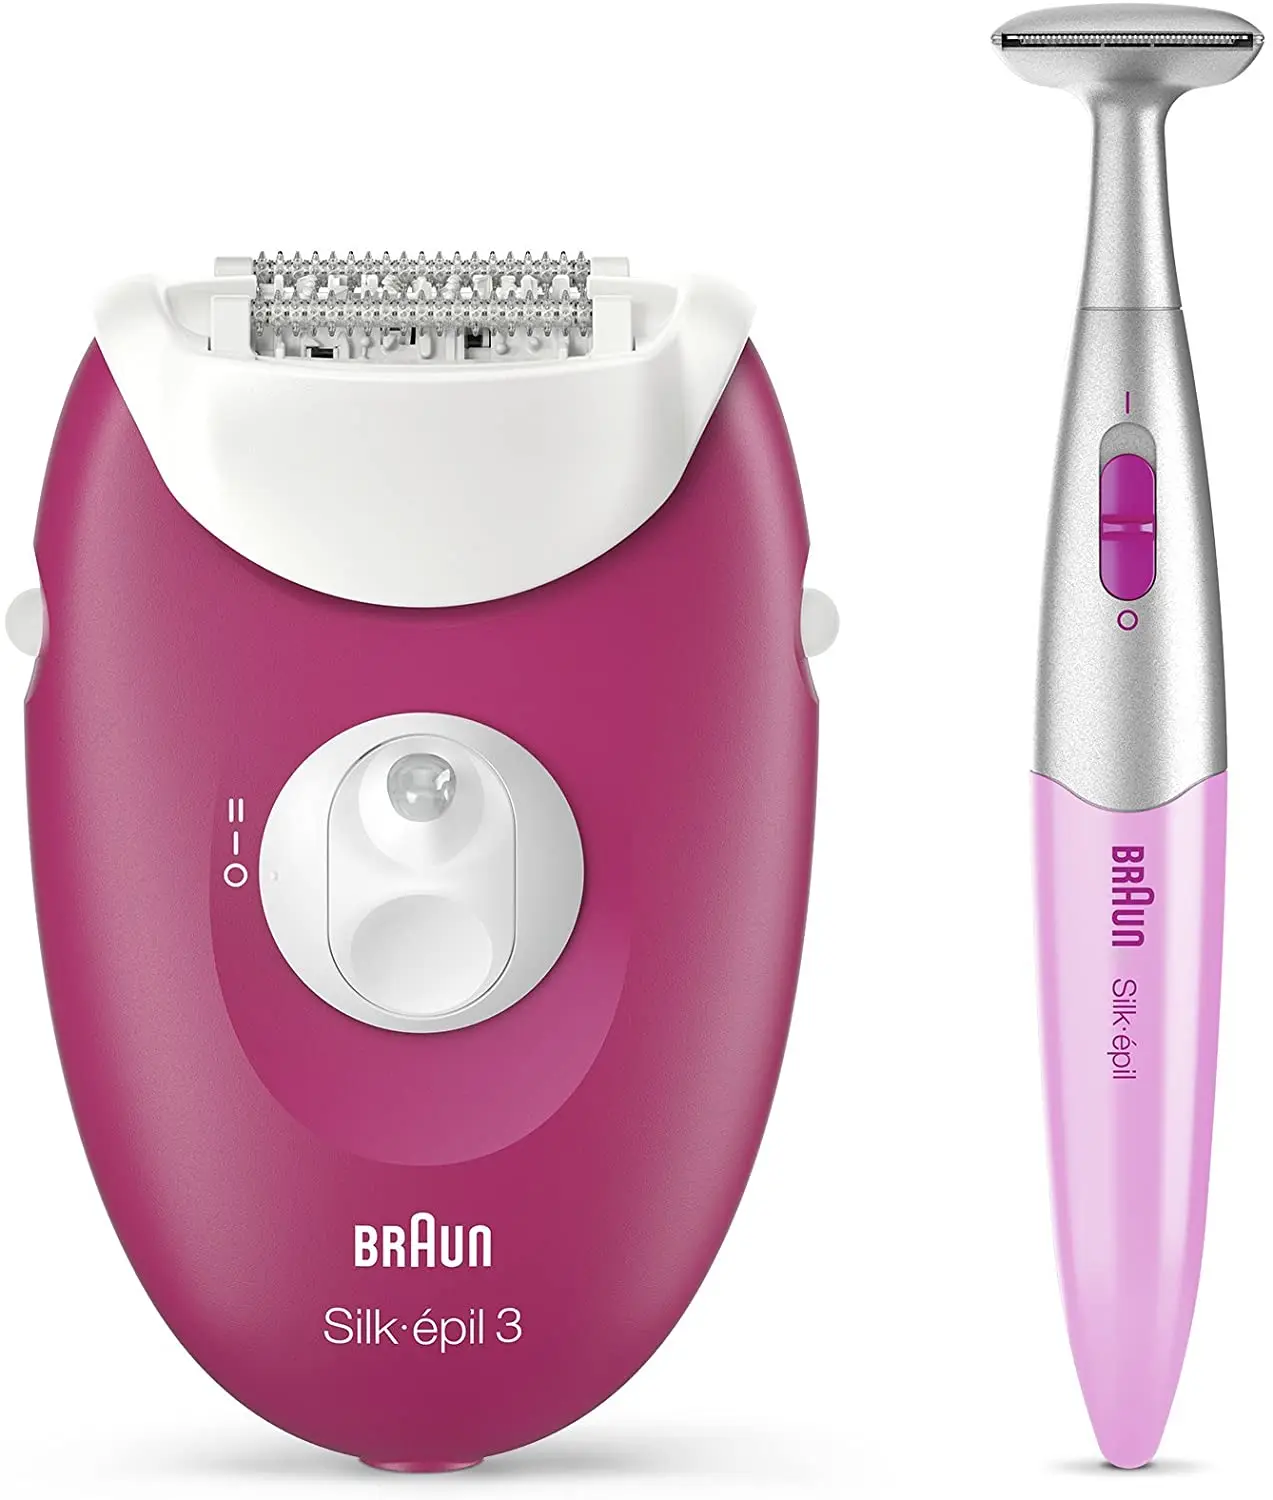 

Braun silk-epil 3 3-420 Wet and Dry Free raspberry pink-corded Epilator 2 inserts smart feature